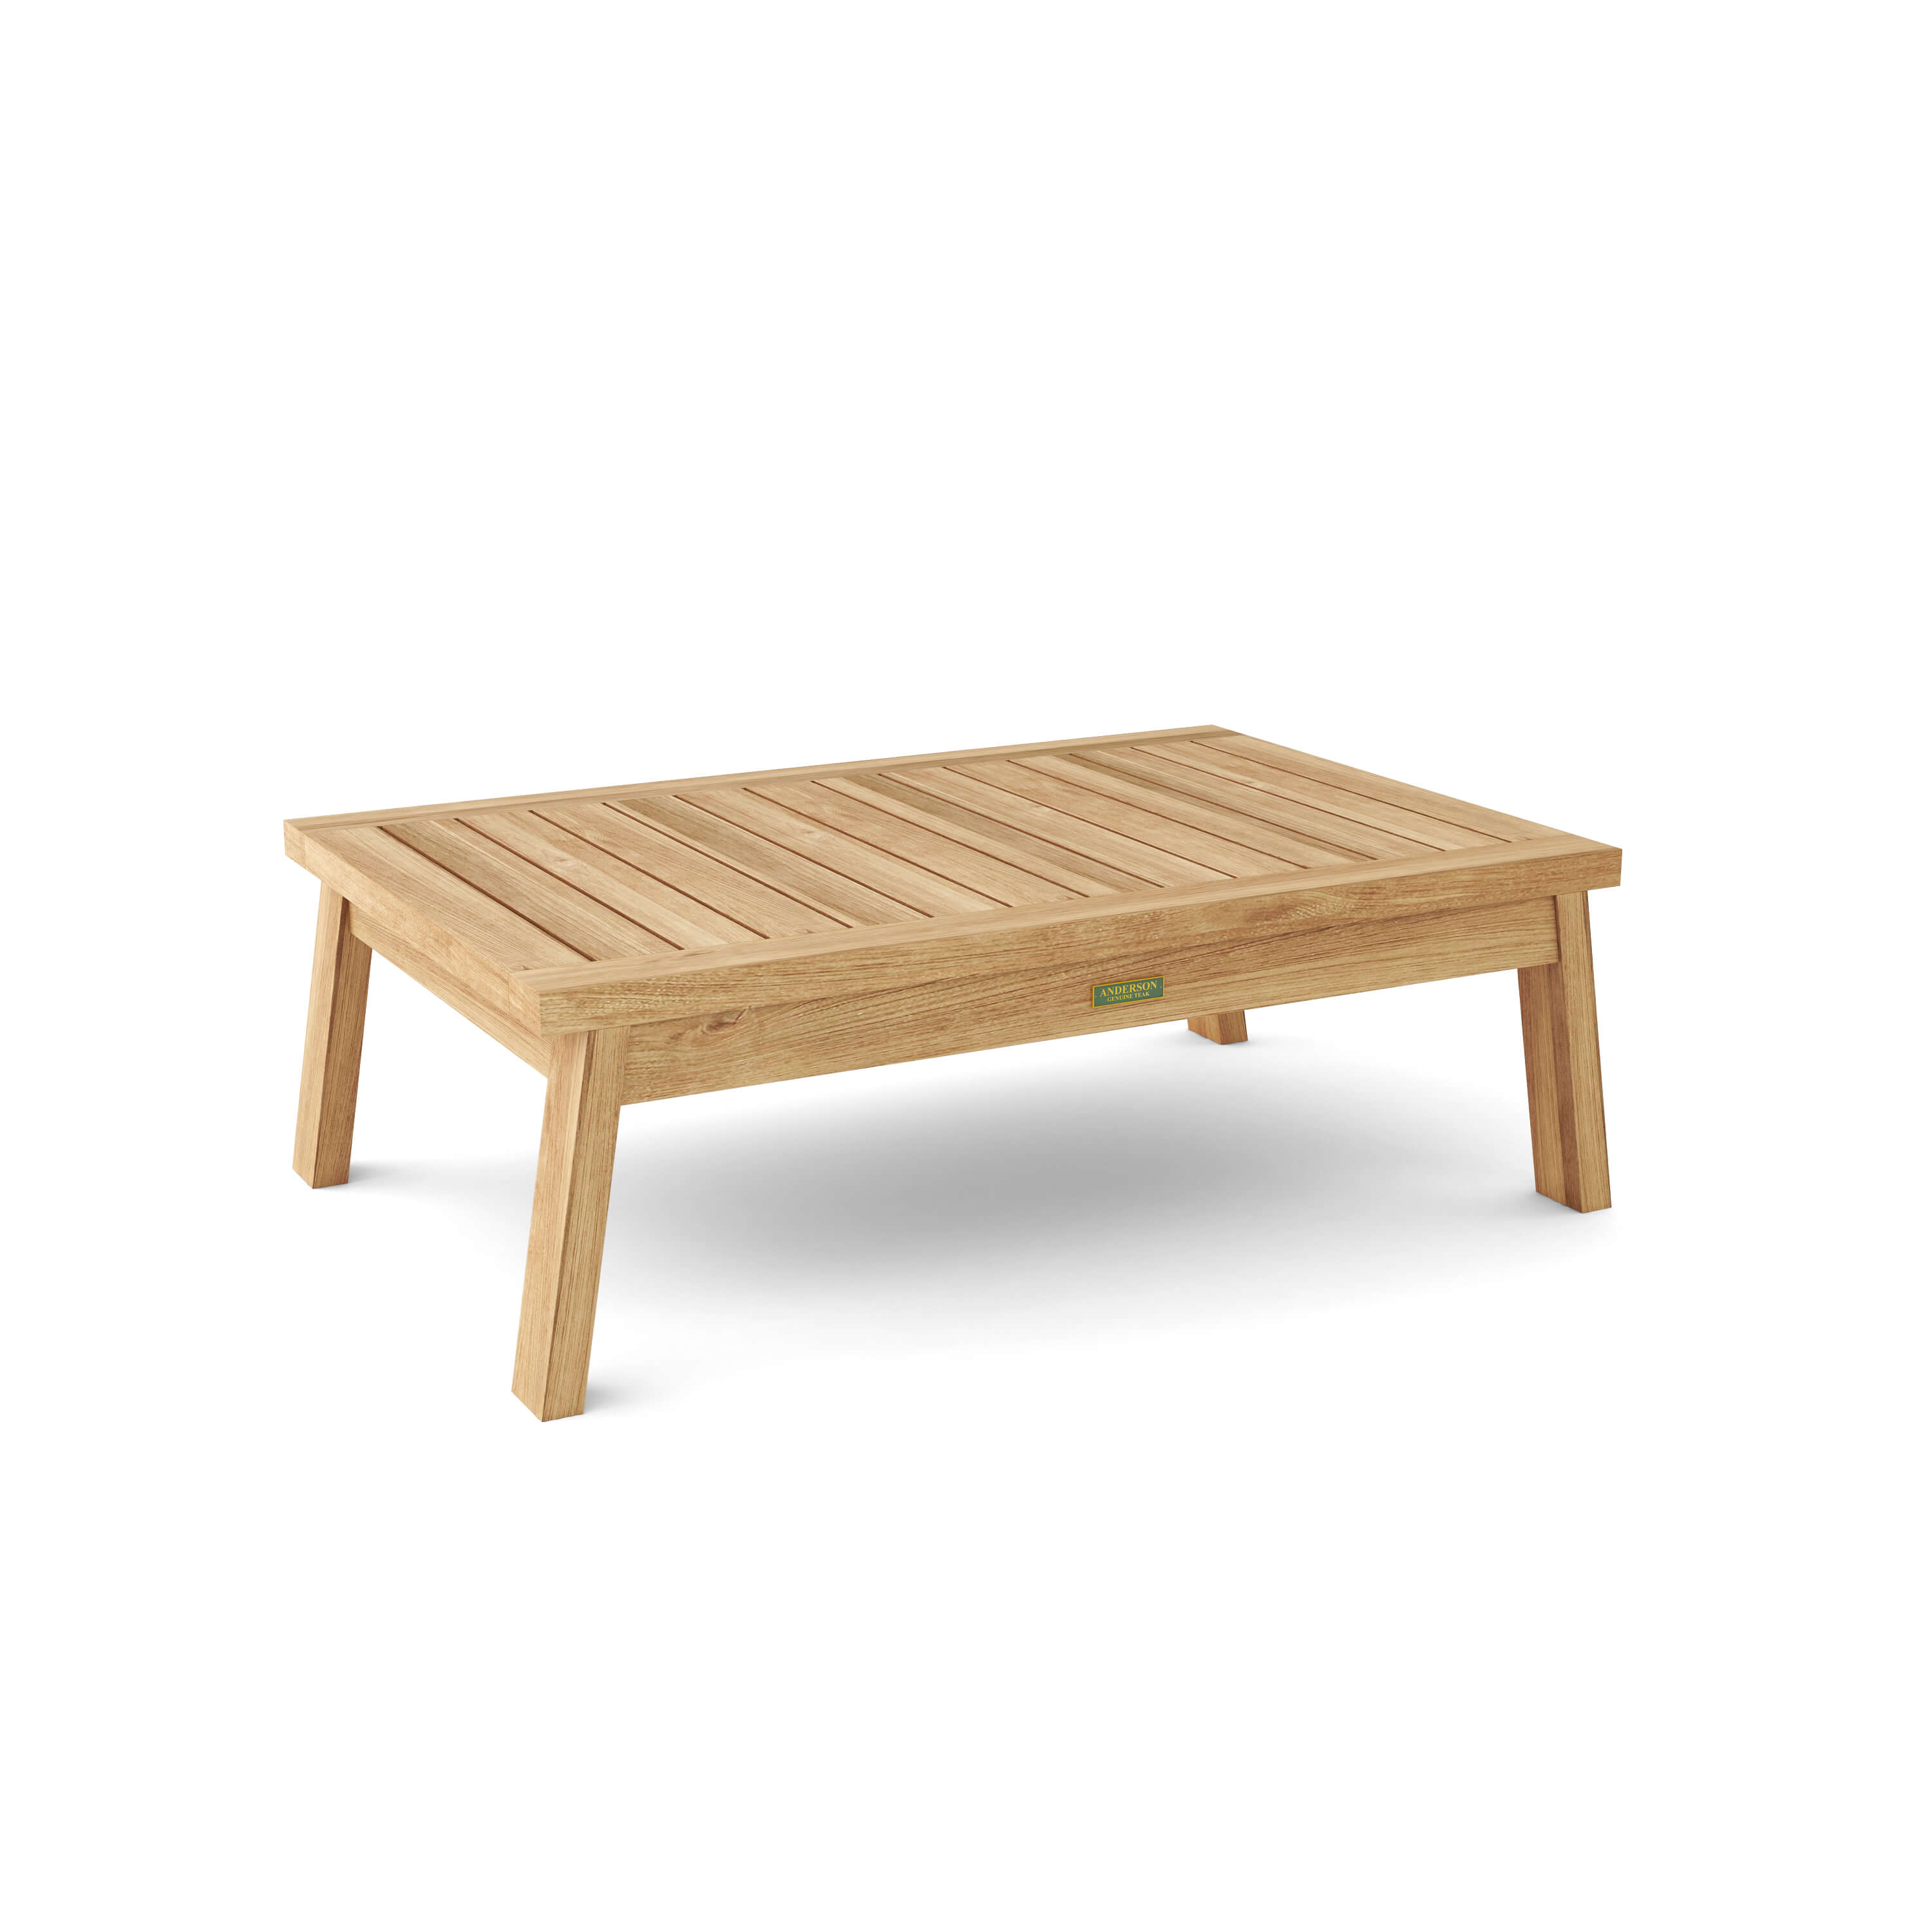 Anderson Teak - PALERMO RECTANGULAR COFFEE TABLE | DS-325